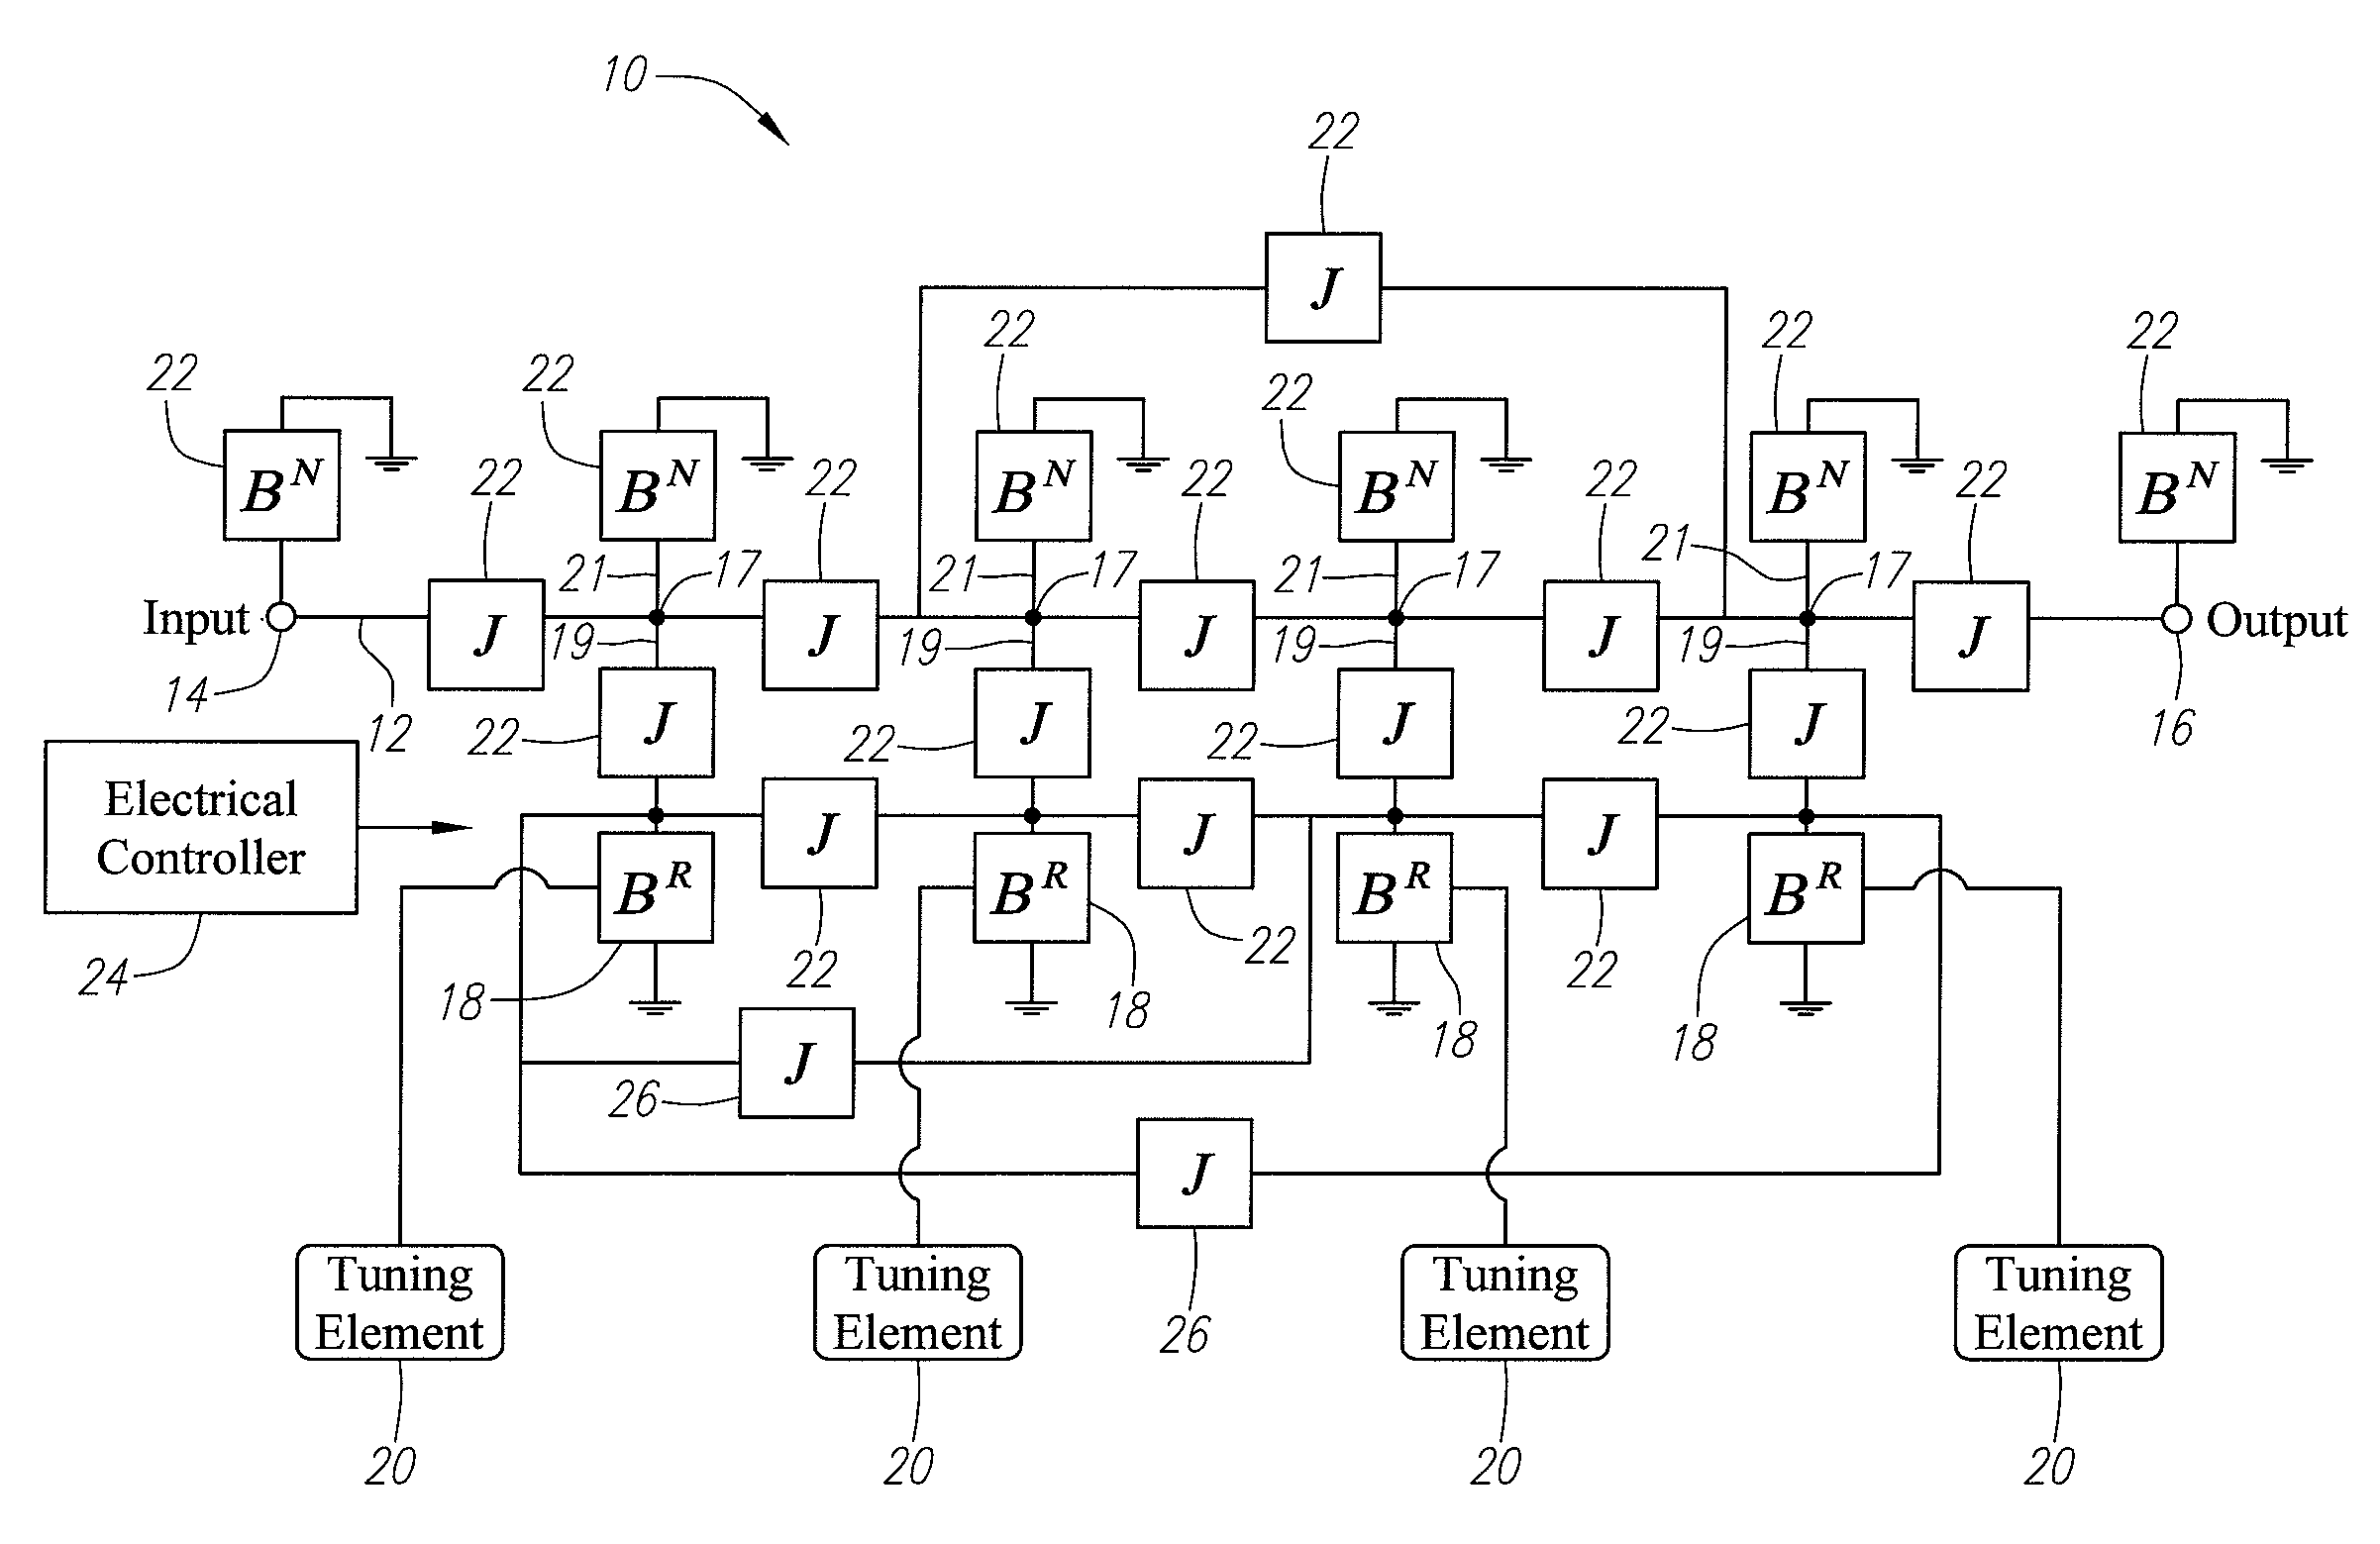 Low-loss tunable radio frequency filter